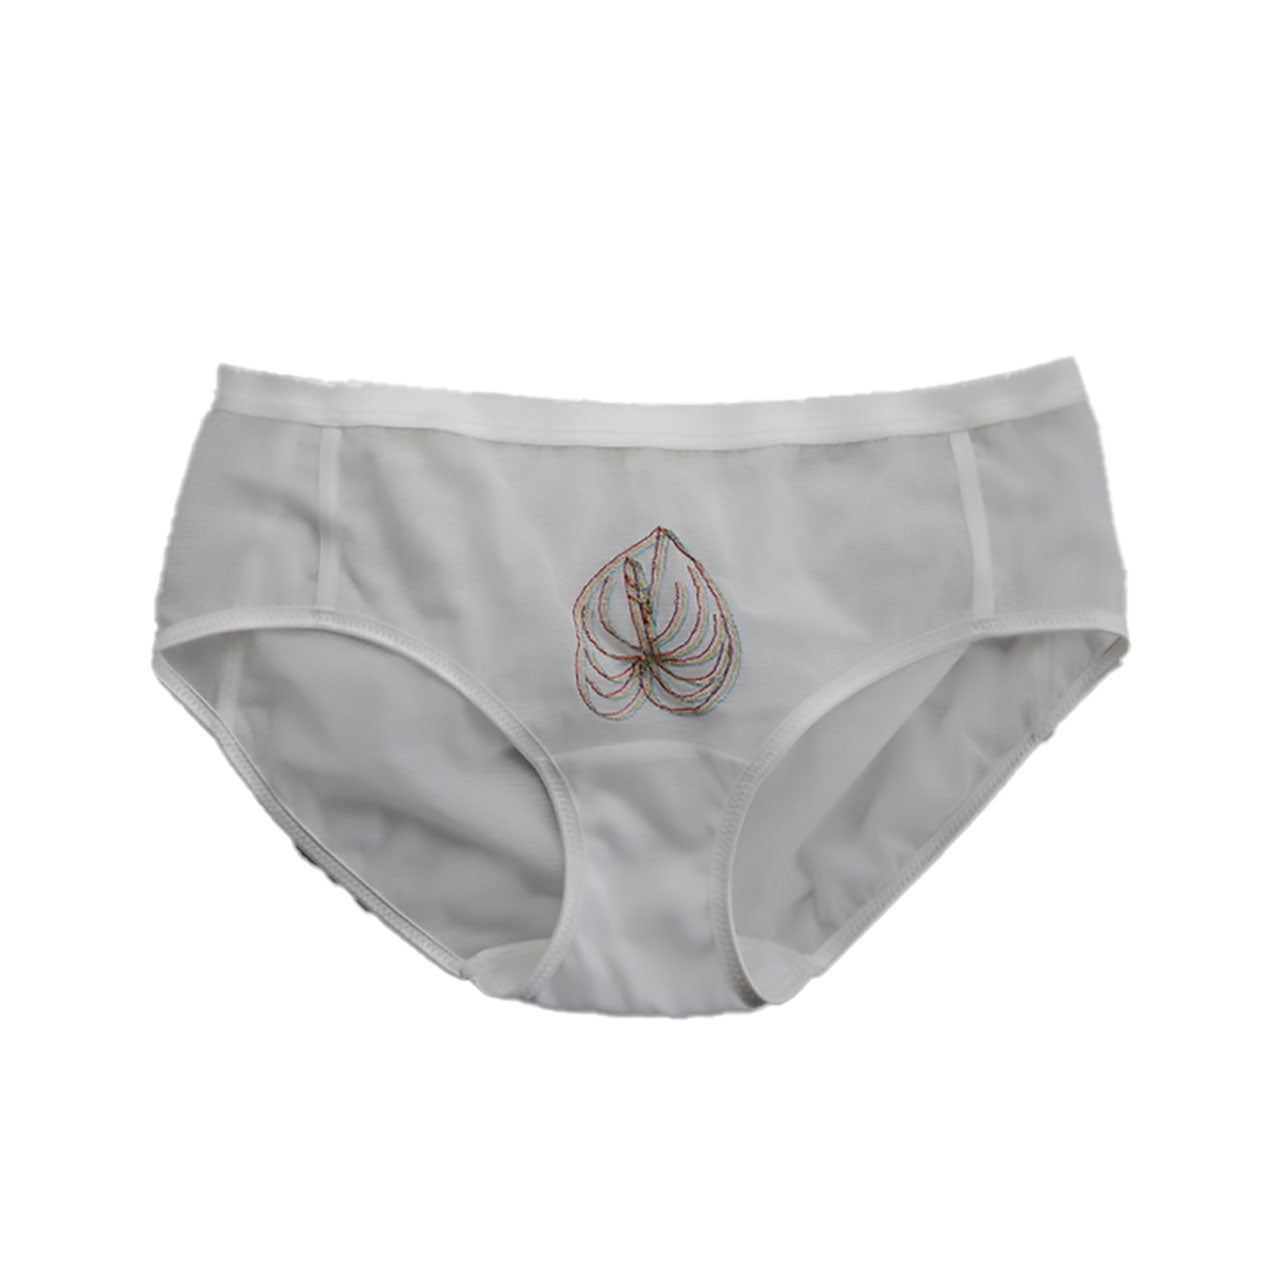 SALE!!! STANDARD PANTY EMBROIDERY POWER NET / WHITE Anthrium